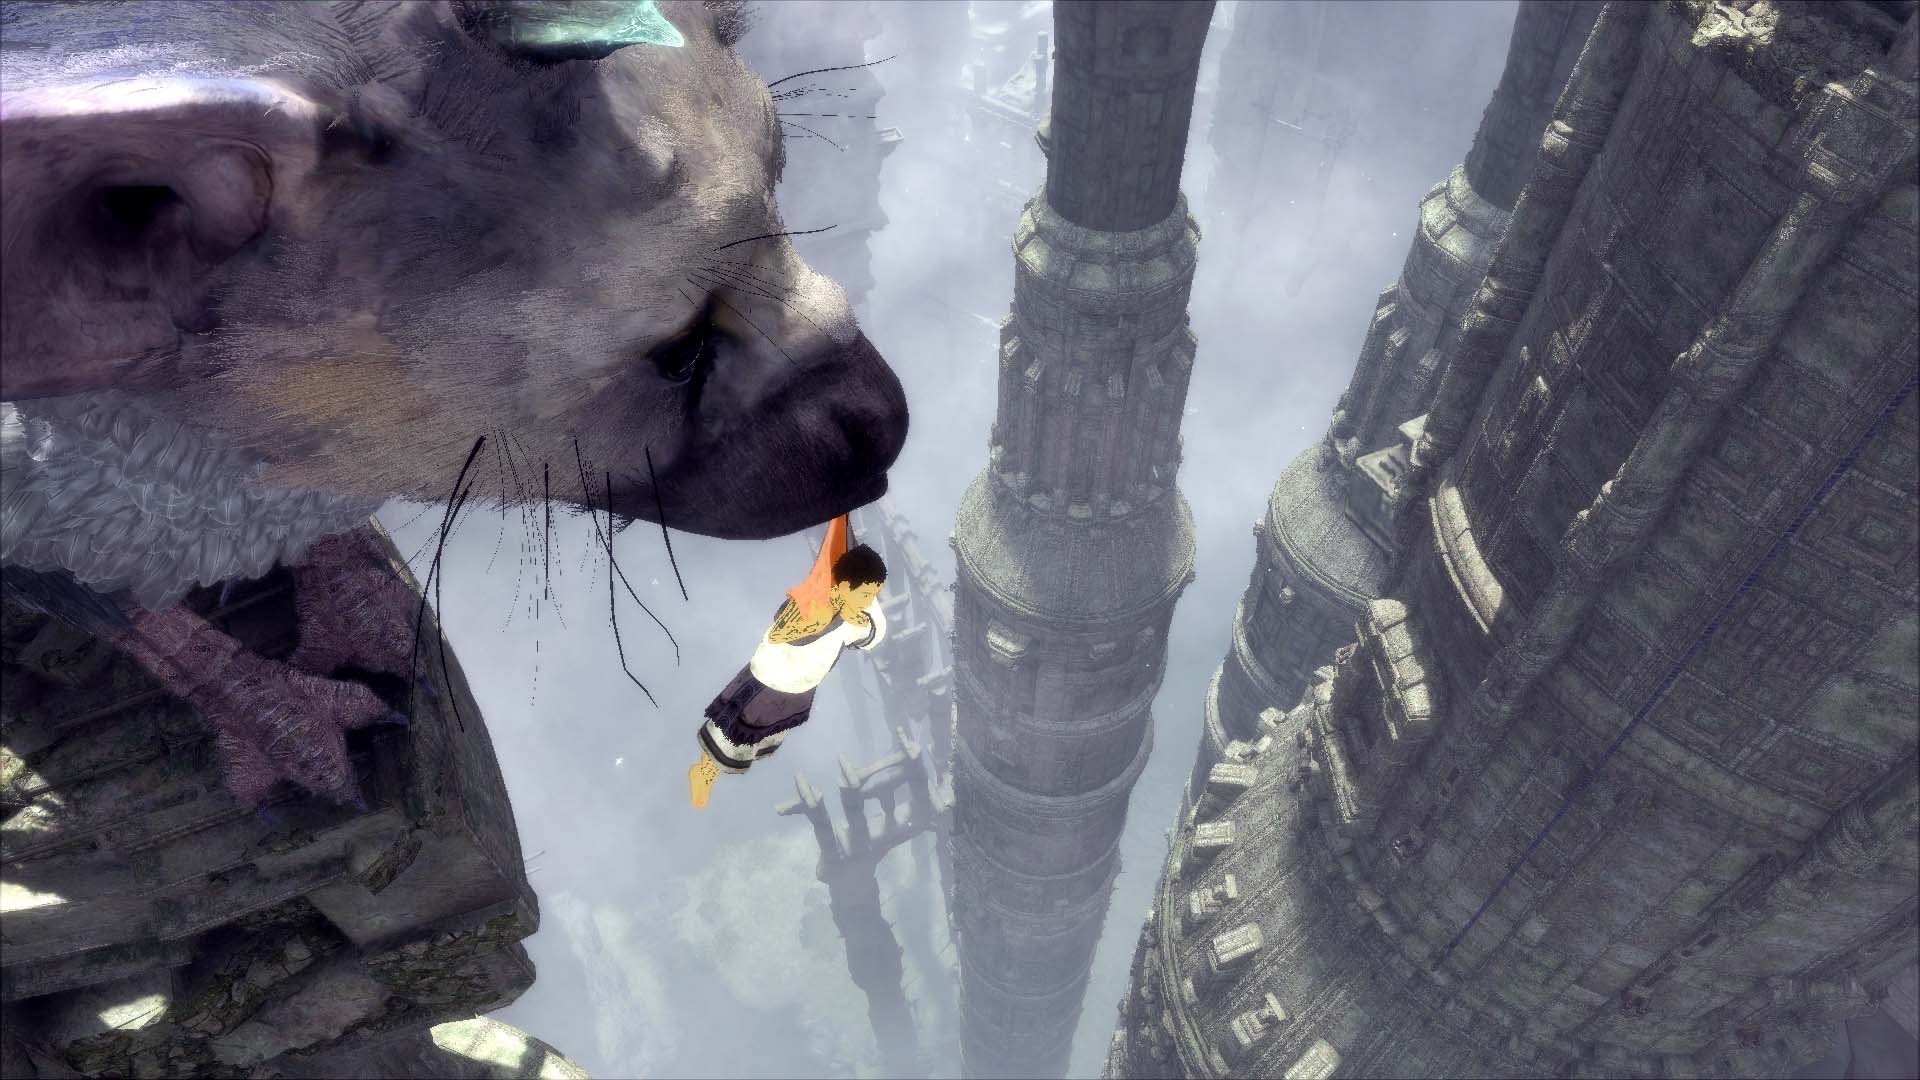 Amazing The Last Guardian Pictures & Backgrounds